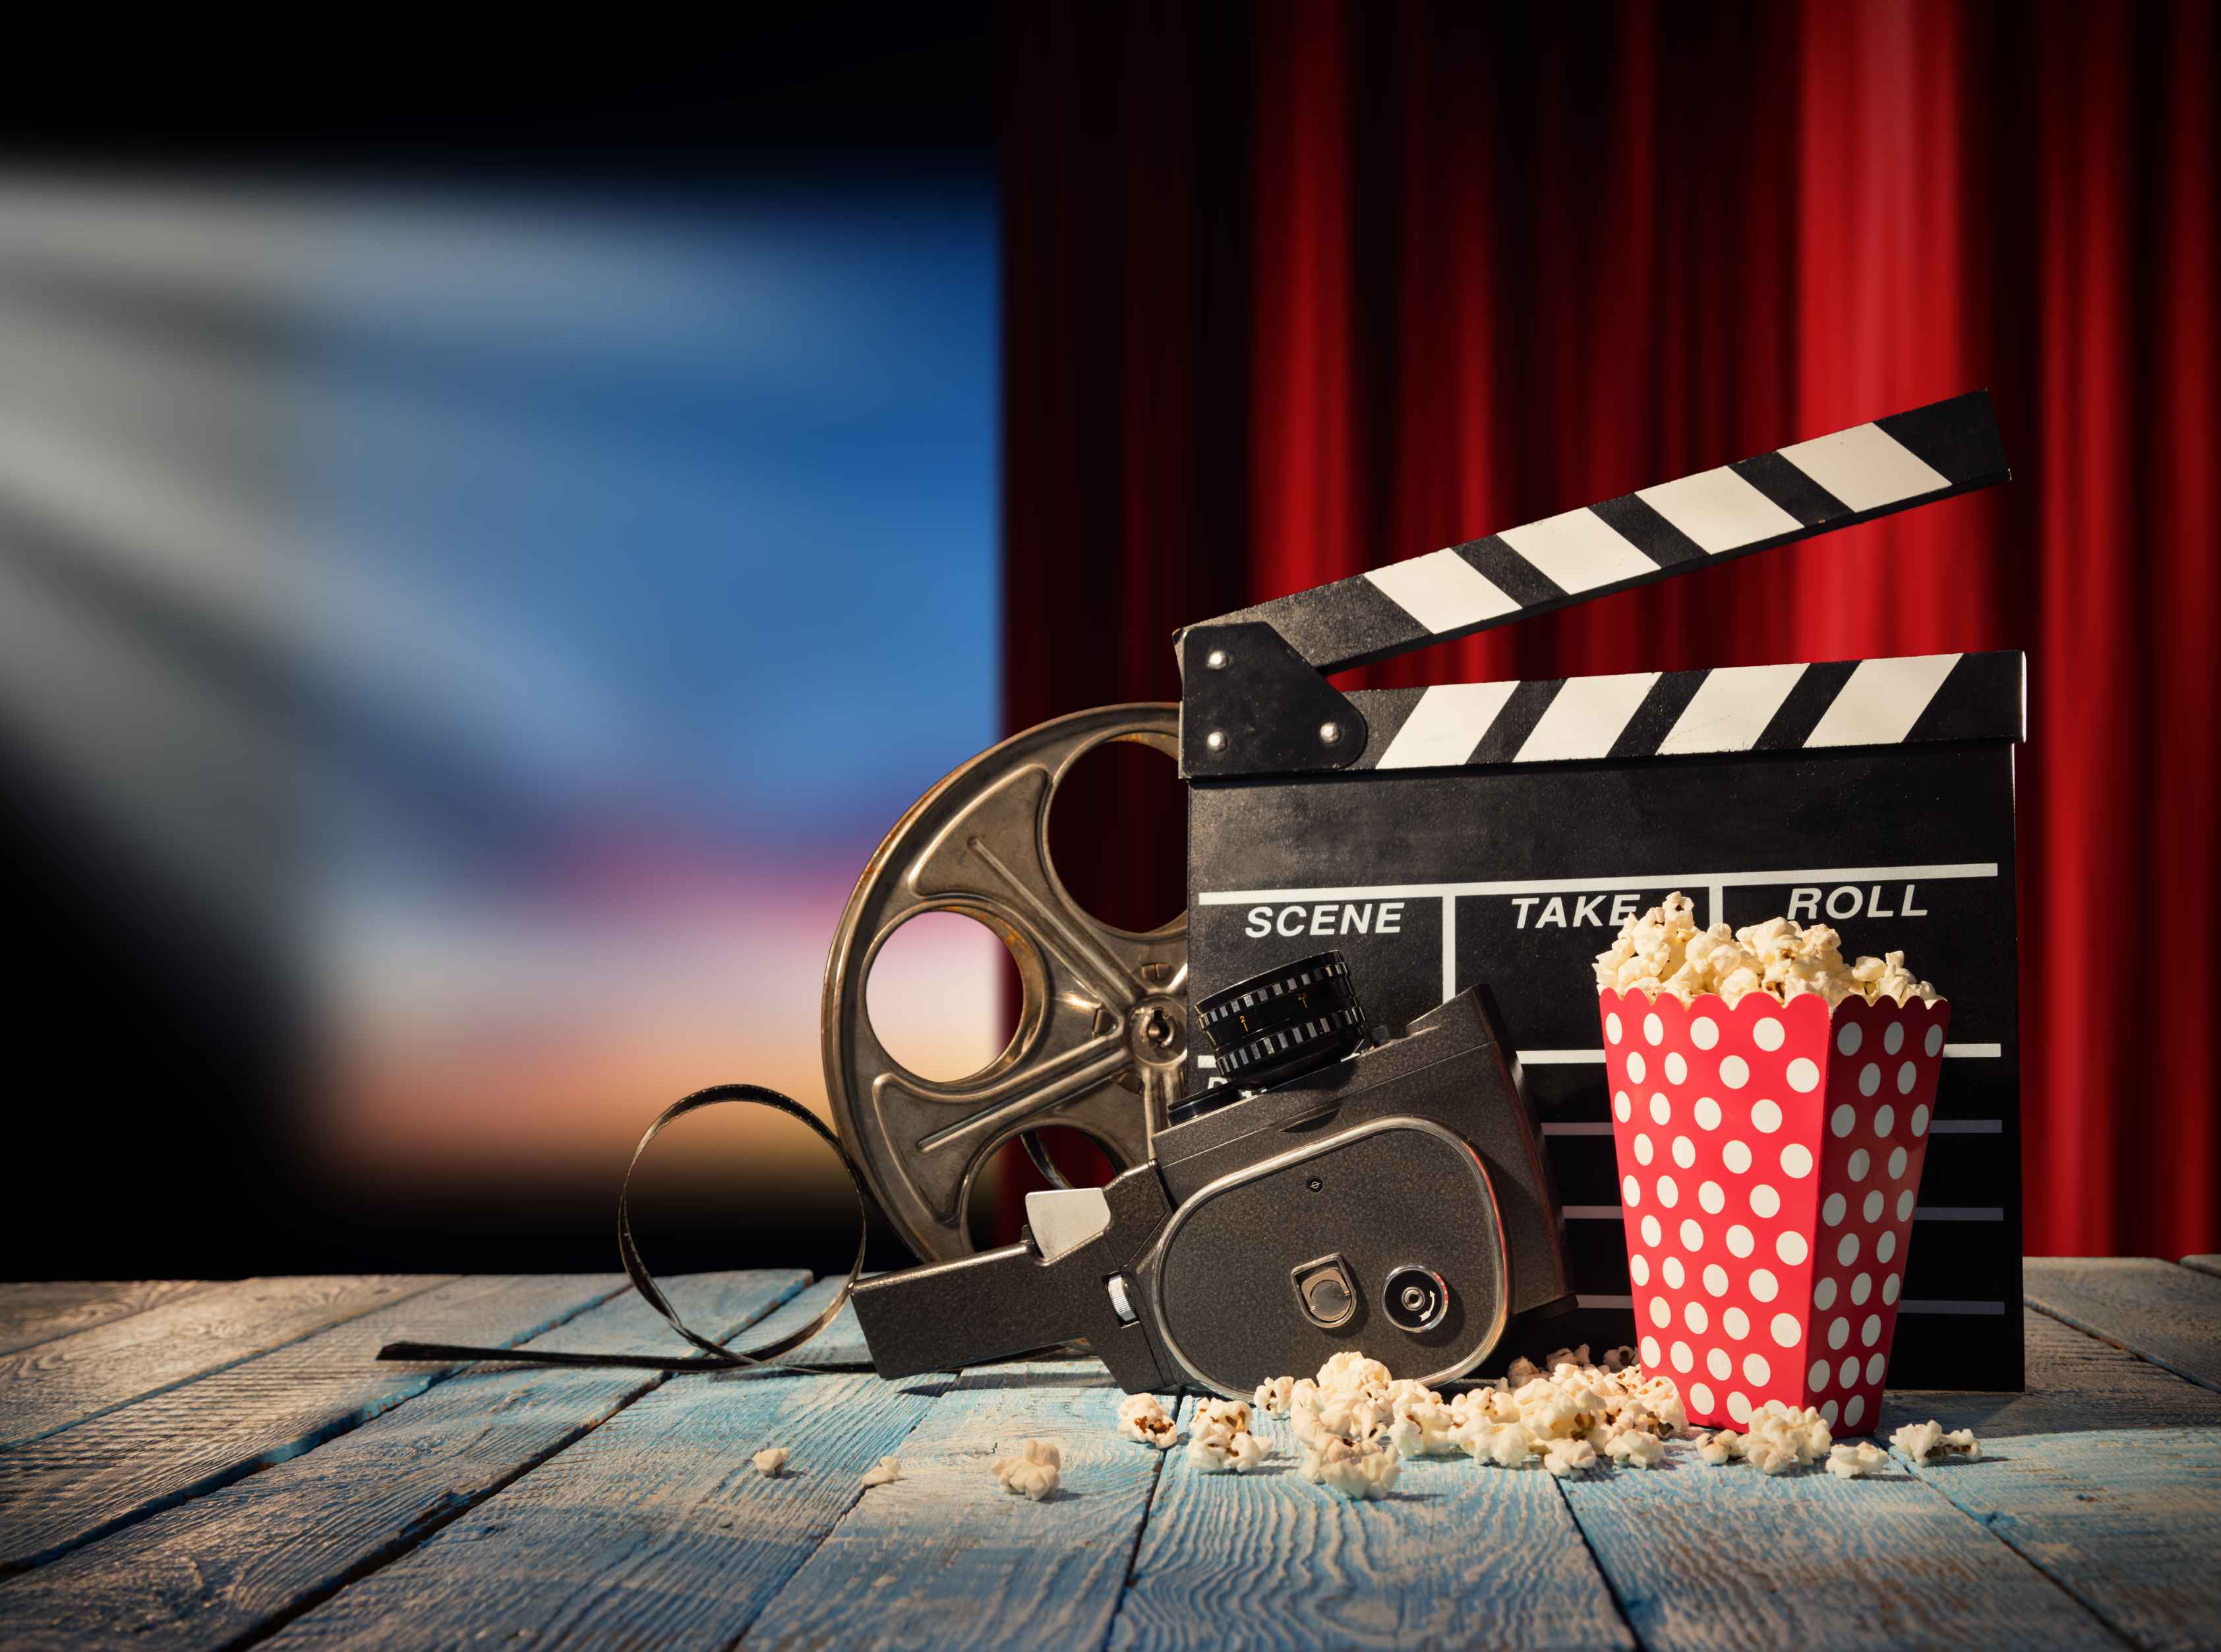 Retro film production accessories placed on wooden planks